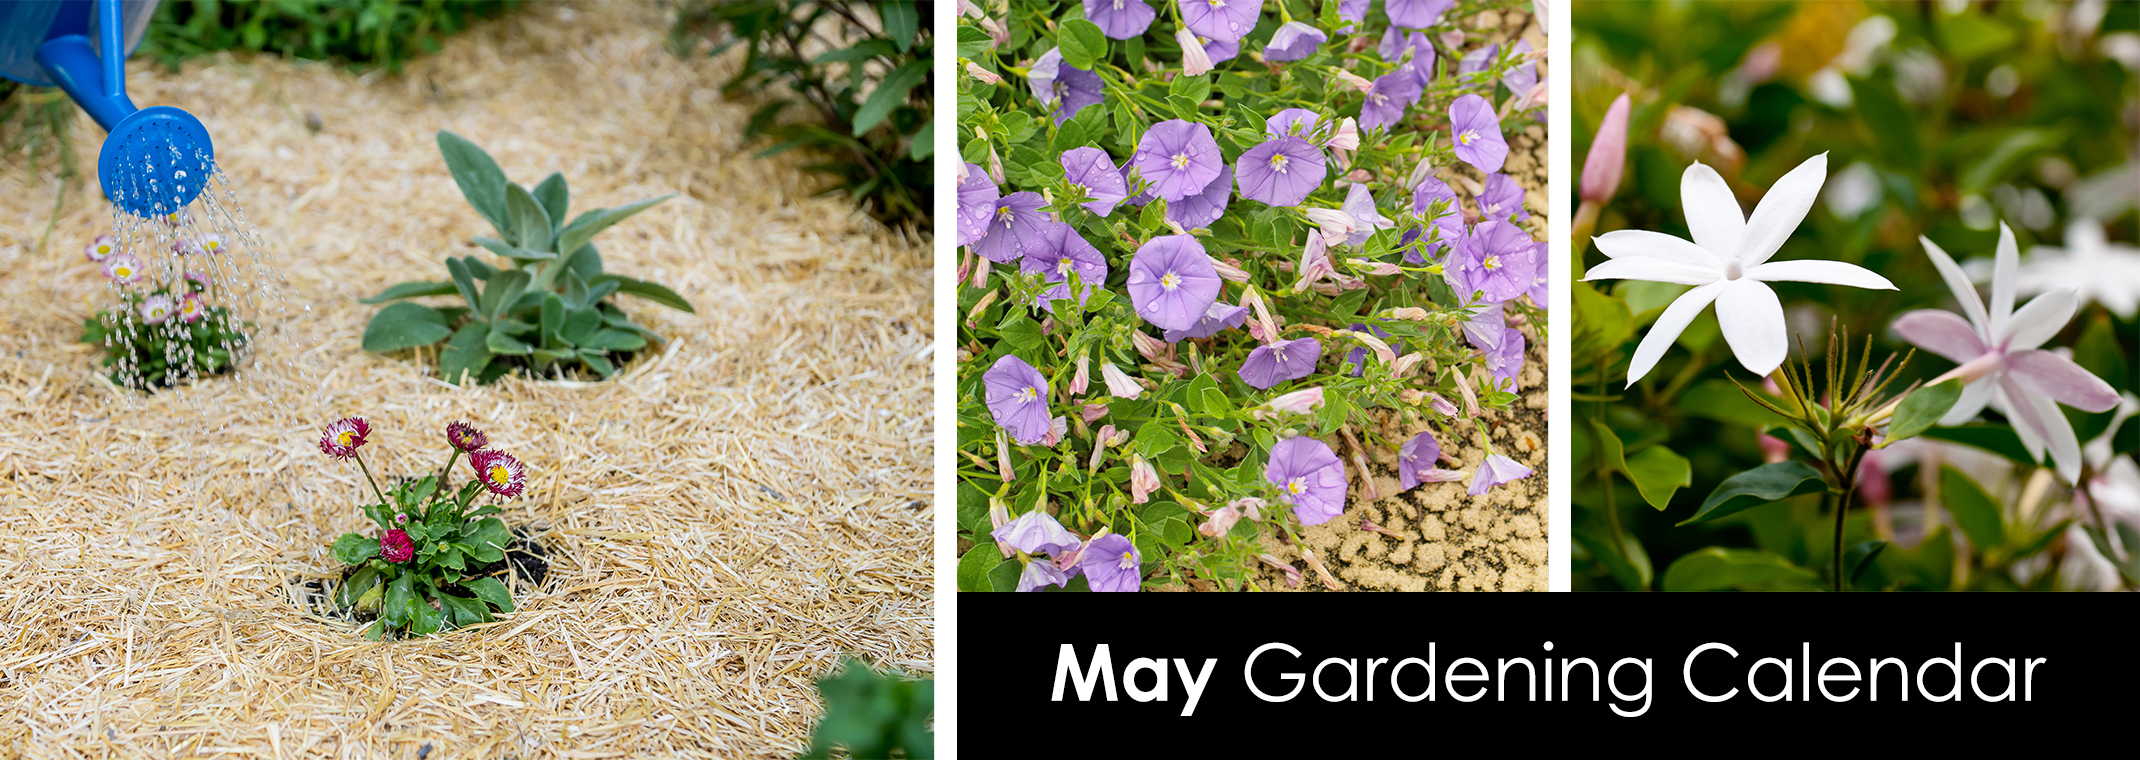 Flowers and plants surrounded by straw mulch and being watered, Ground Morning Glory, and star jasmine.